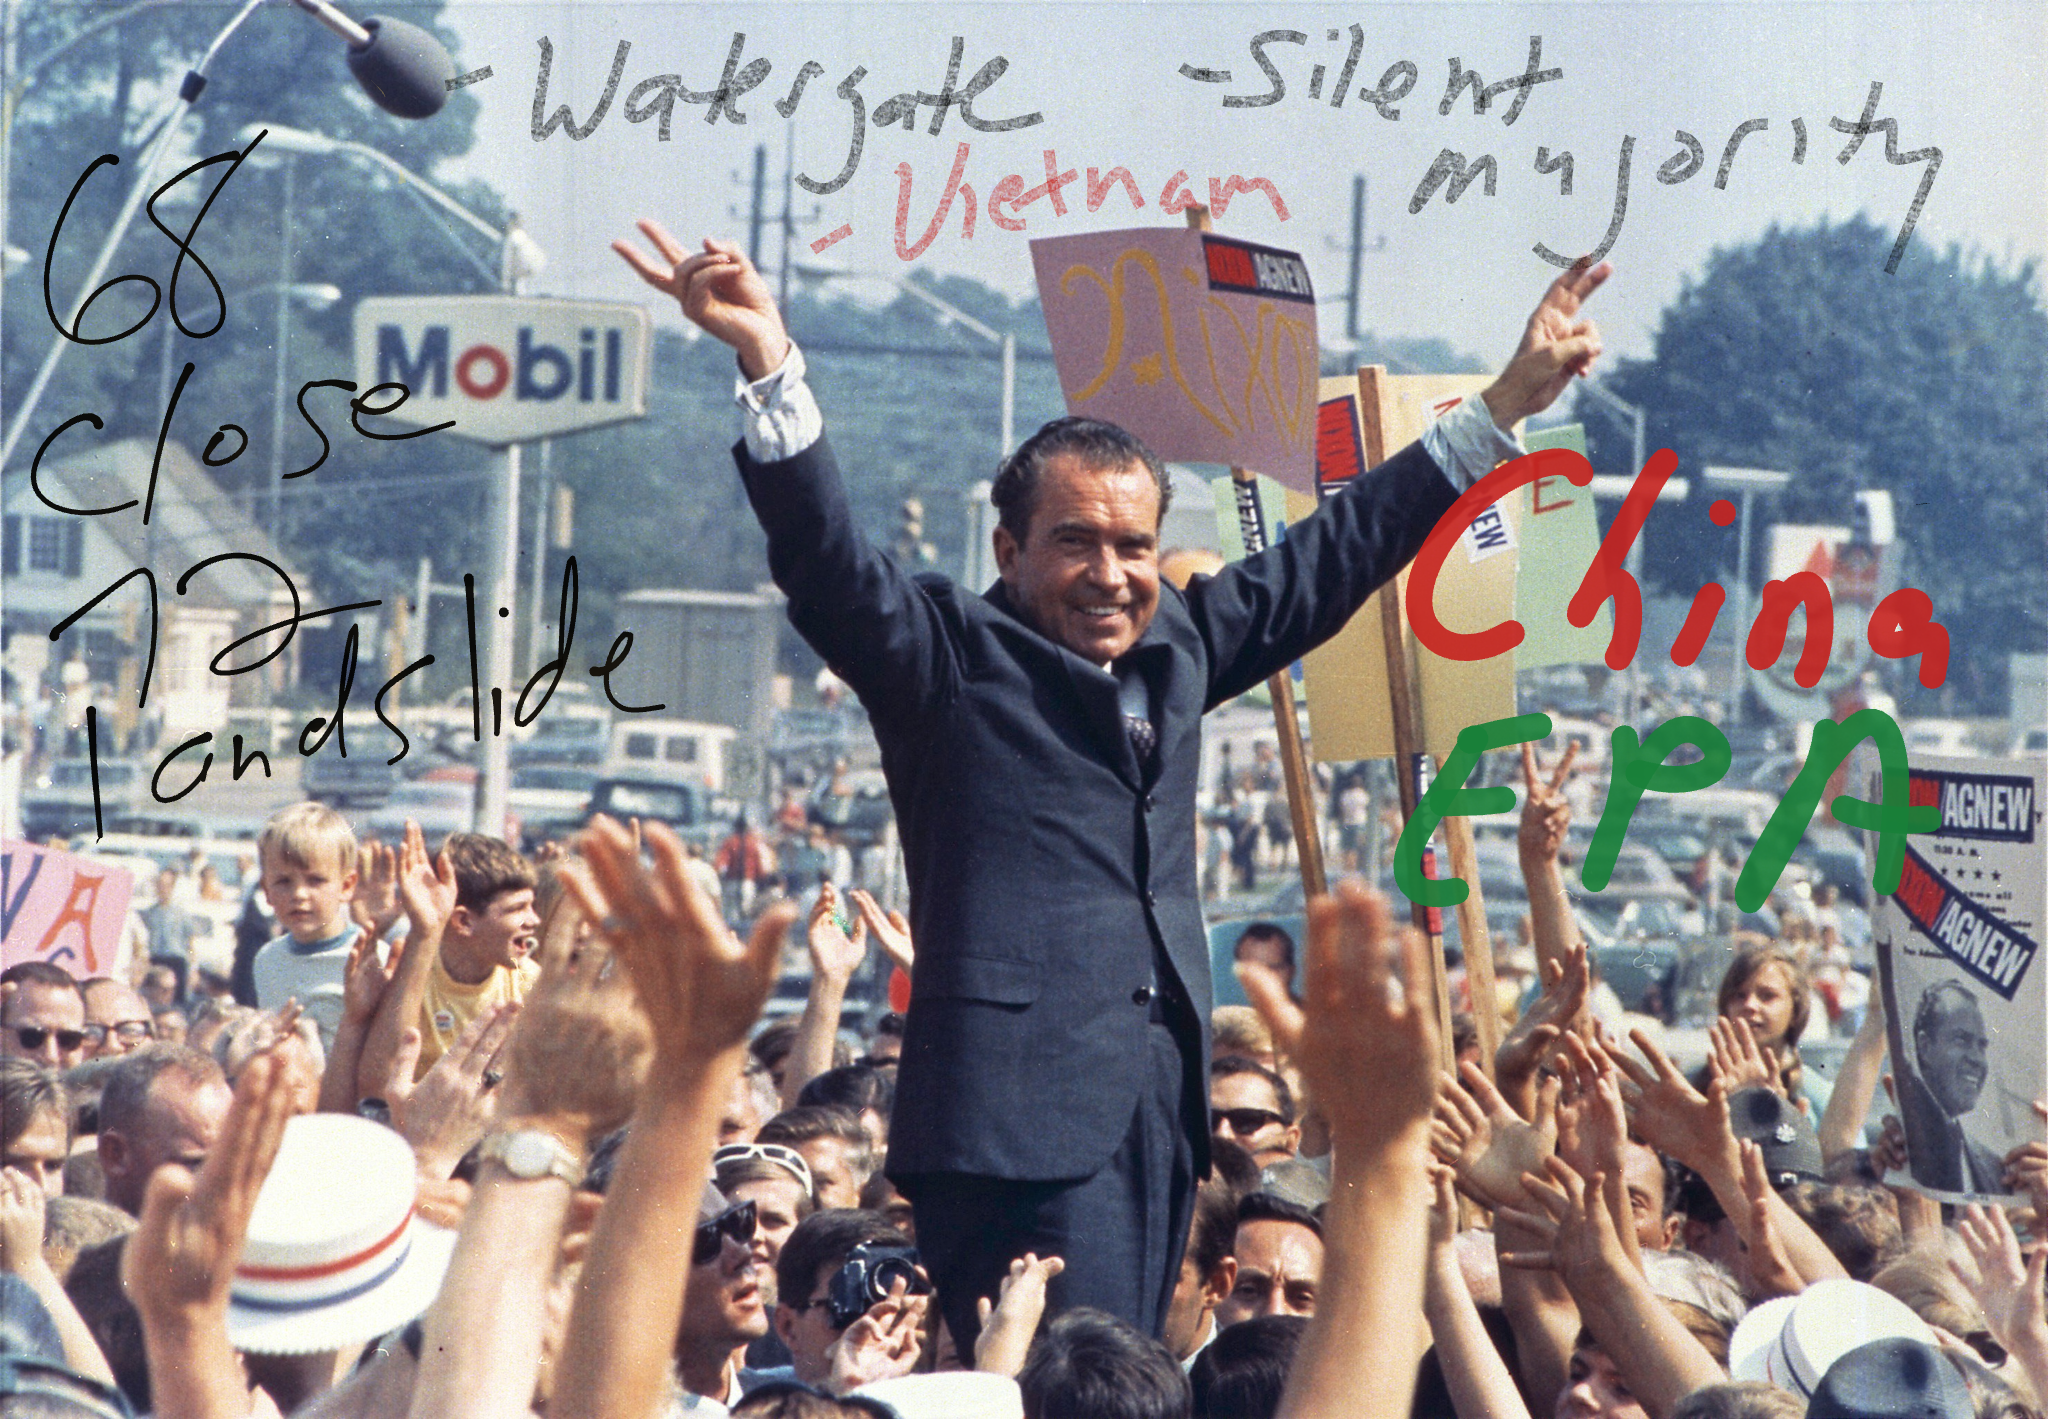 Richard Nixon image with quick annotations about his elections, Watergate, Vietnam, China, and the EPA.